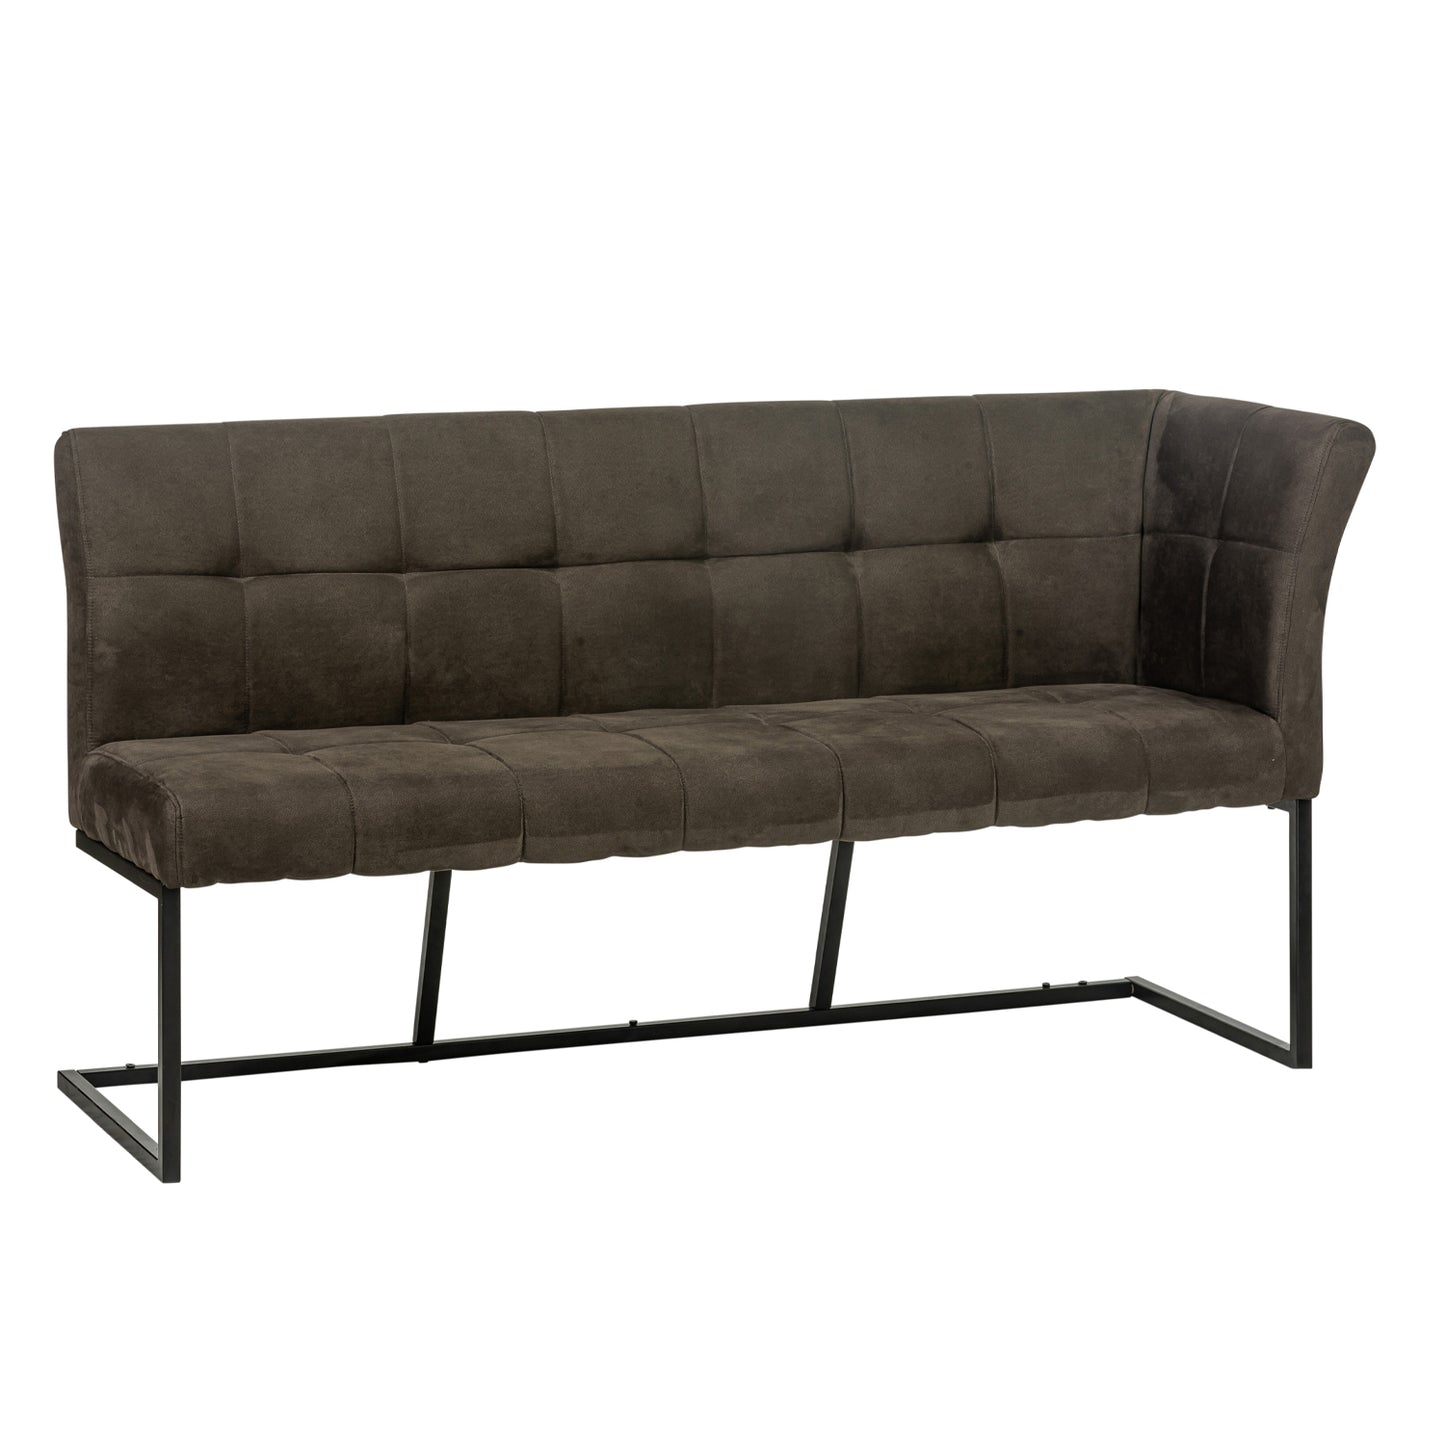 Chichester Dining Bench - Corner Bench in Charcoal